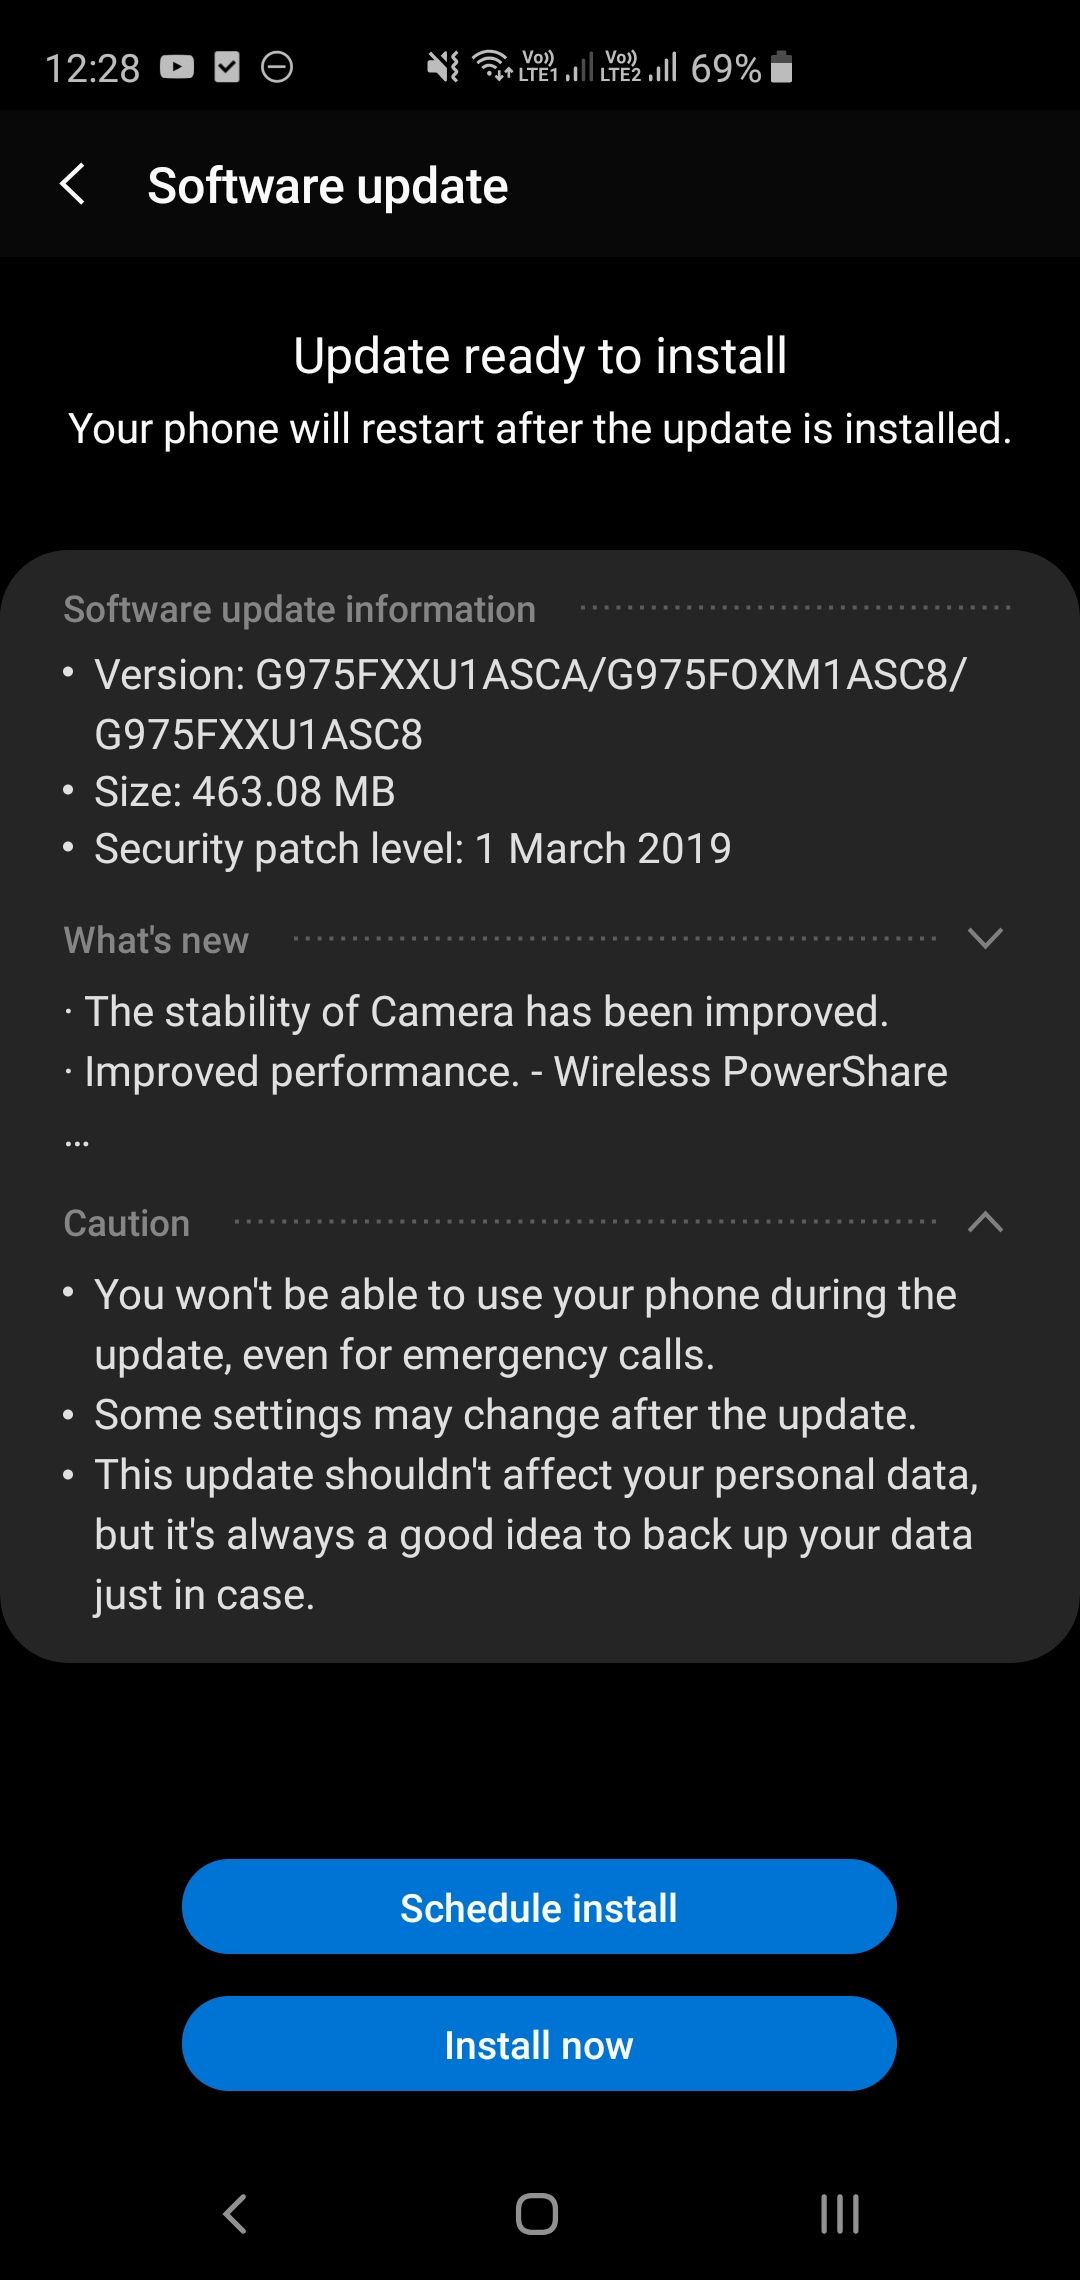 Samsung Galaxy S10+ Software Update March 2019 Android Security Patch G975FXXU1ASCA